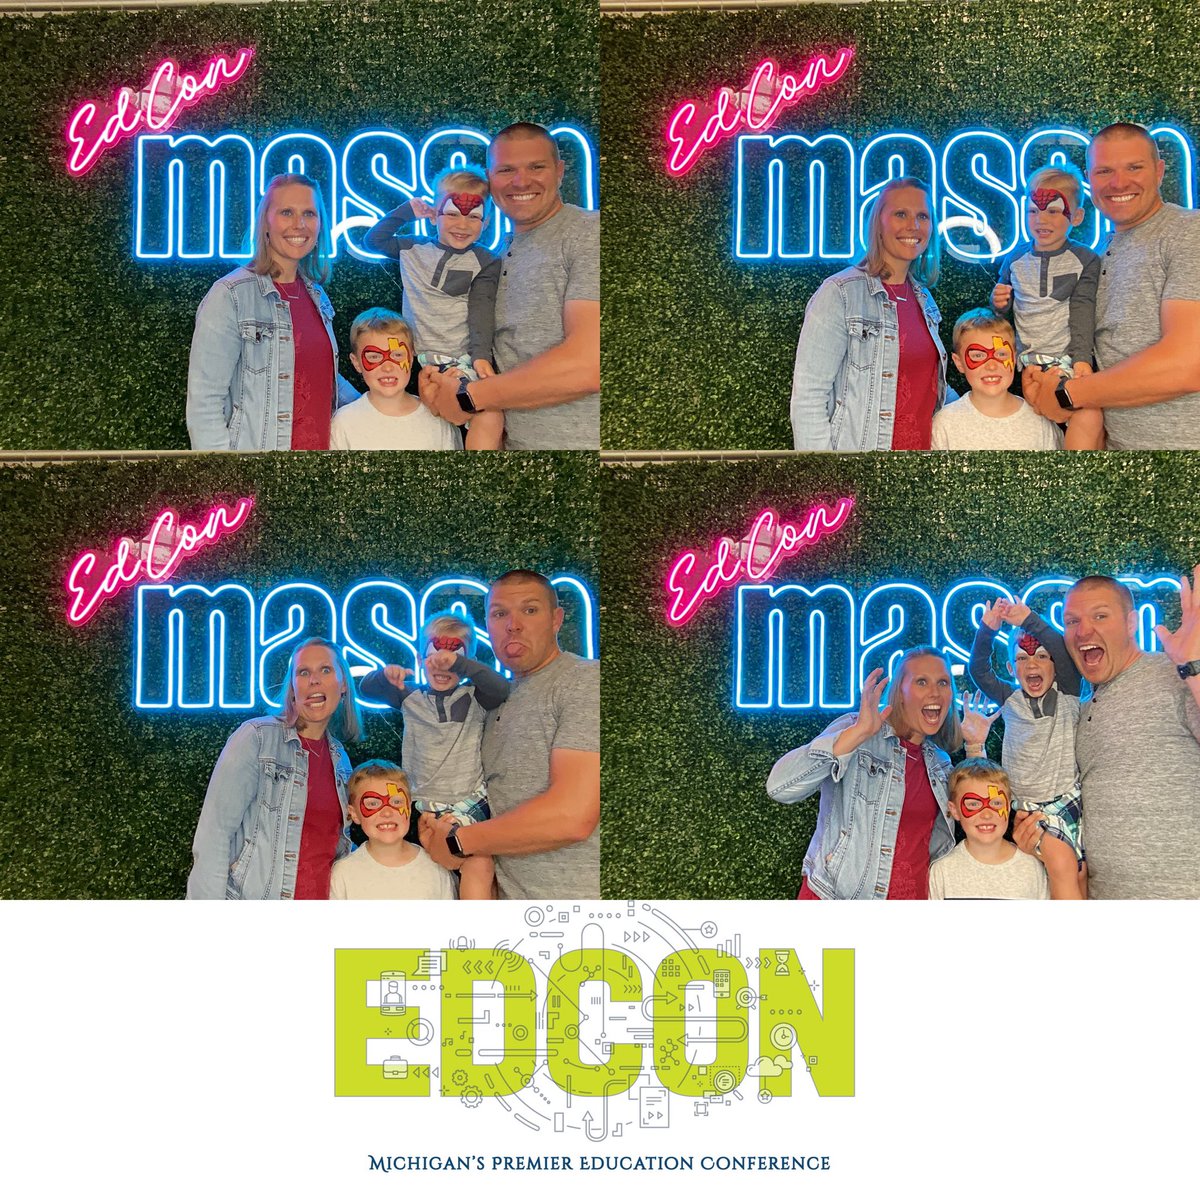 So thankful that @massp makes our families a priority too at #Edcon23